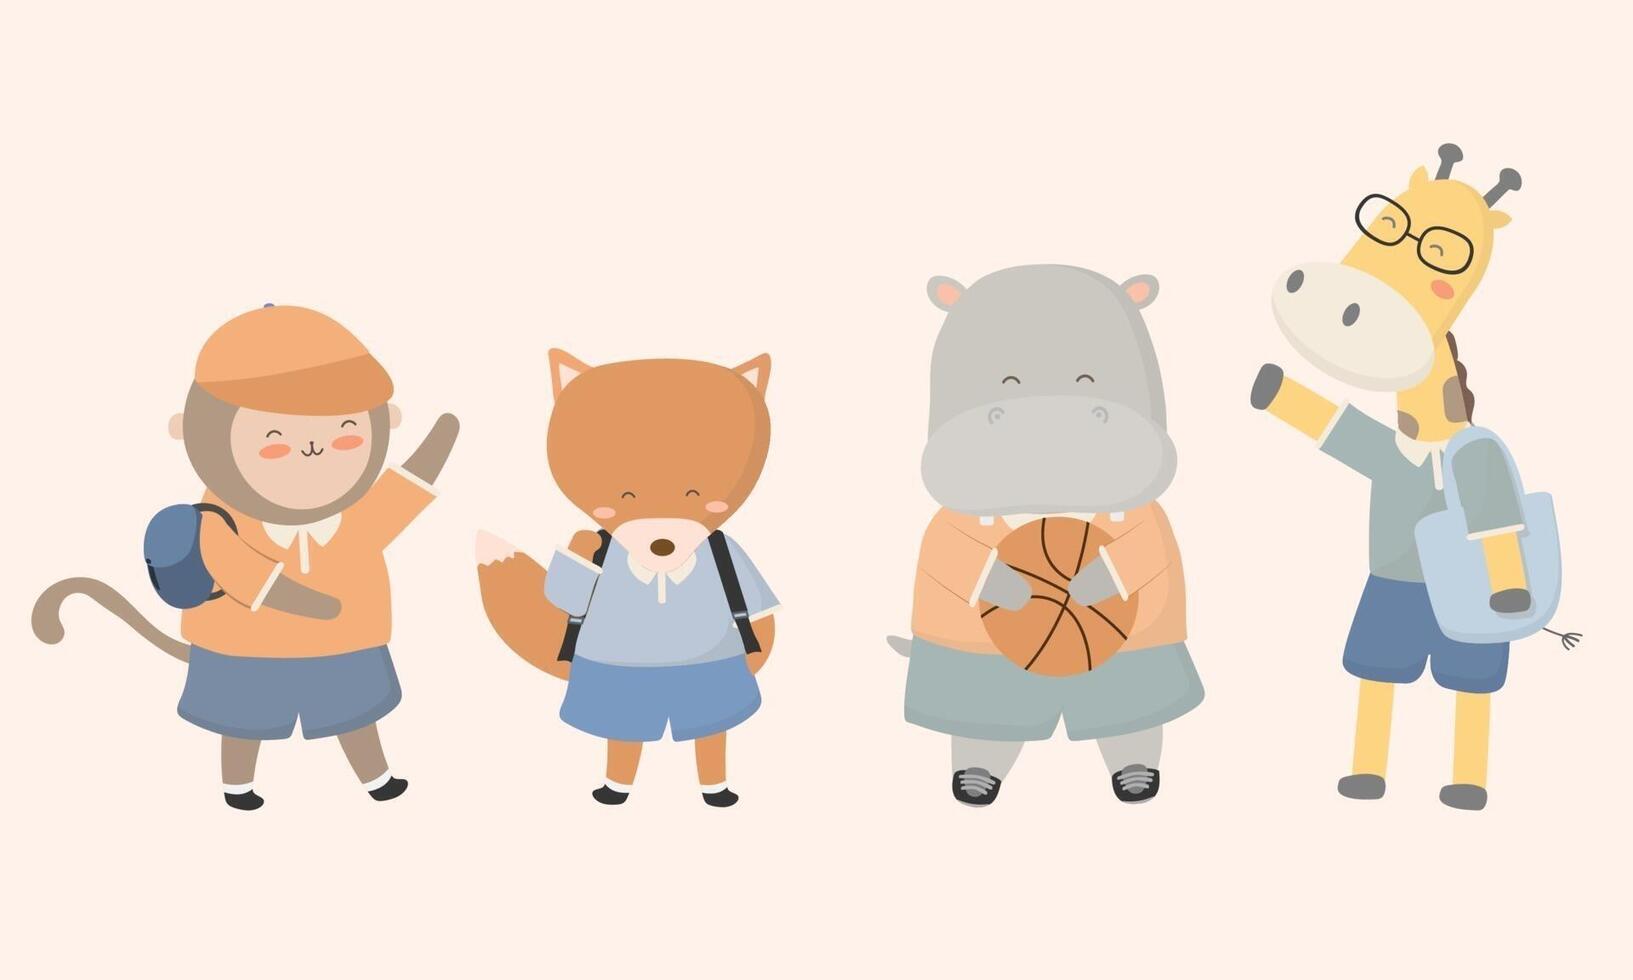 Welcome Back to school with funny school animal characters flat vector illustration.